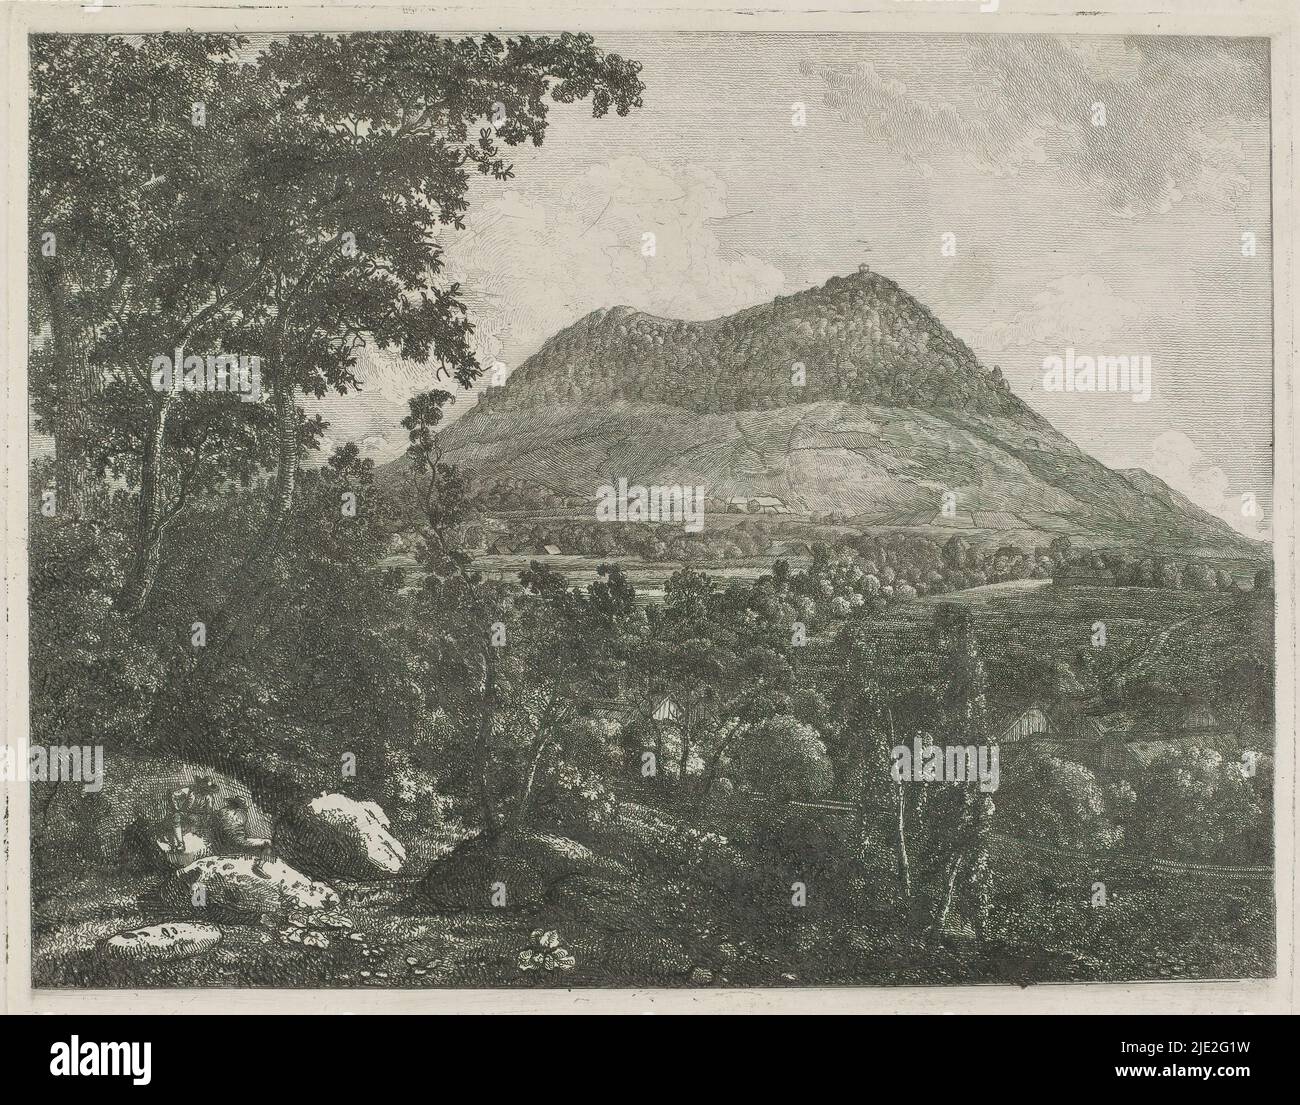 Landscape with the mountain the Landeskrone near Görlitz, print maker: Christoph Nathe, (mentioned on object), after own design by: Christoph Nathe, (mentioned on object), c. 1795, paper, etching, height 209 mm × width 258 mm Stock Photo